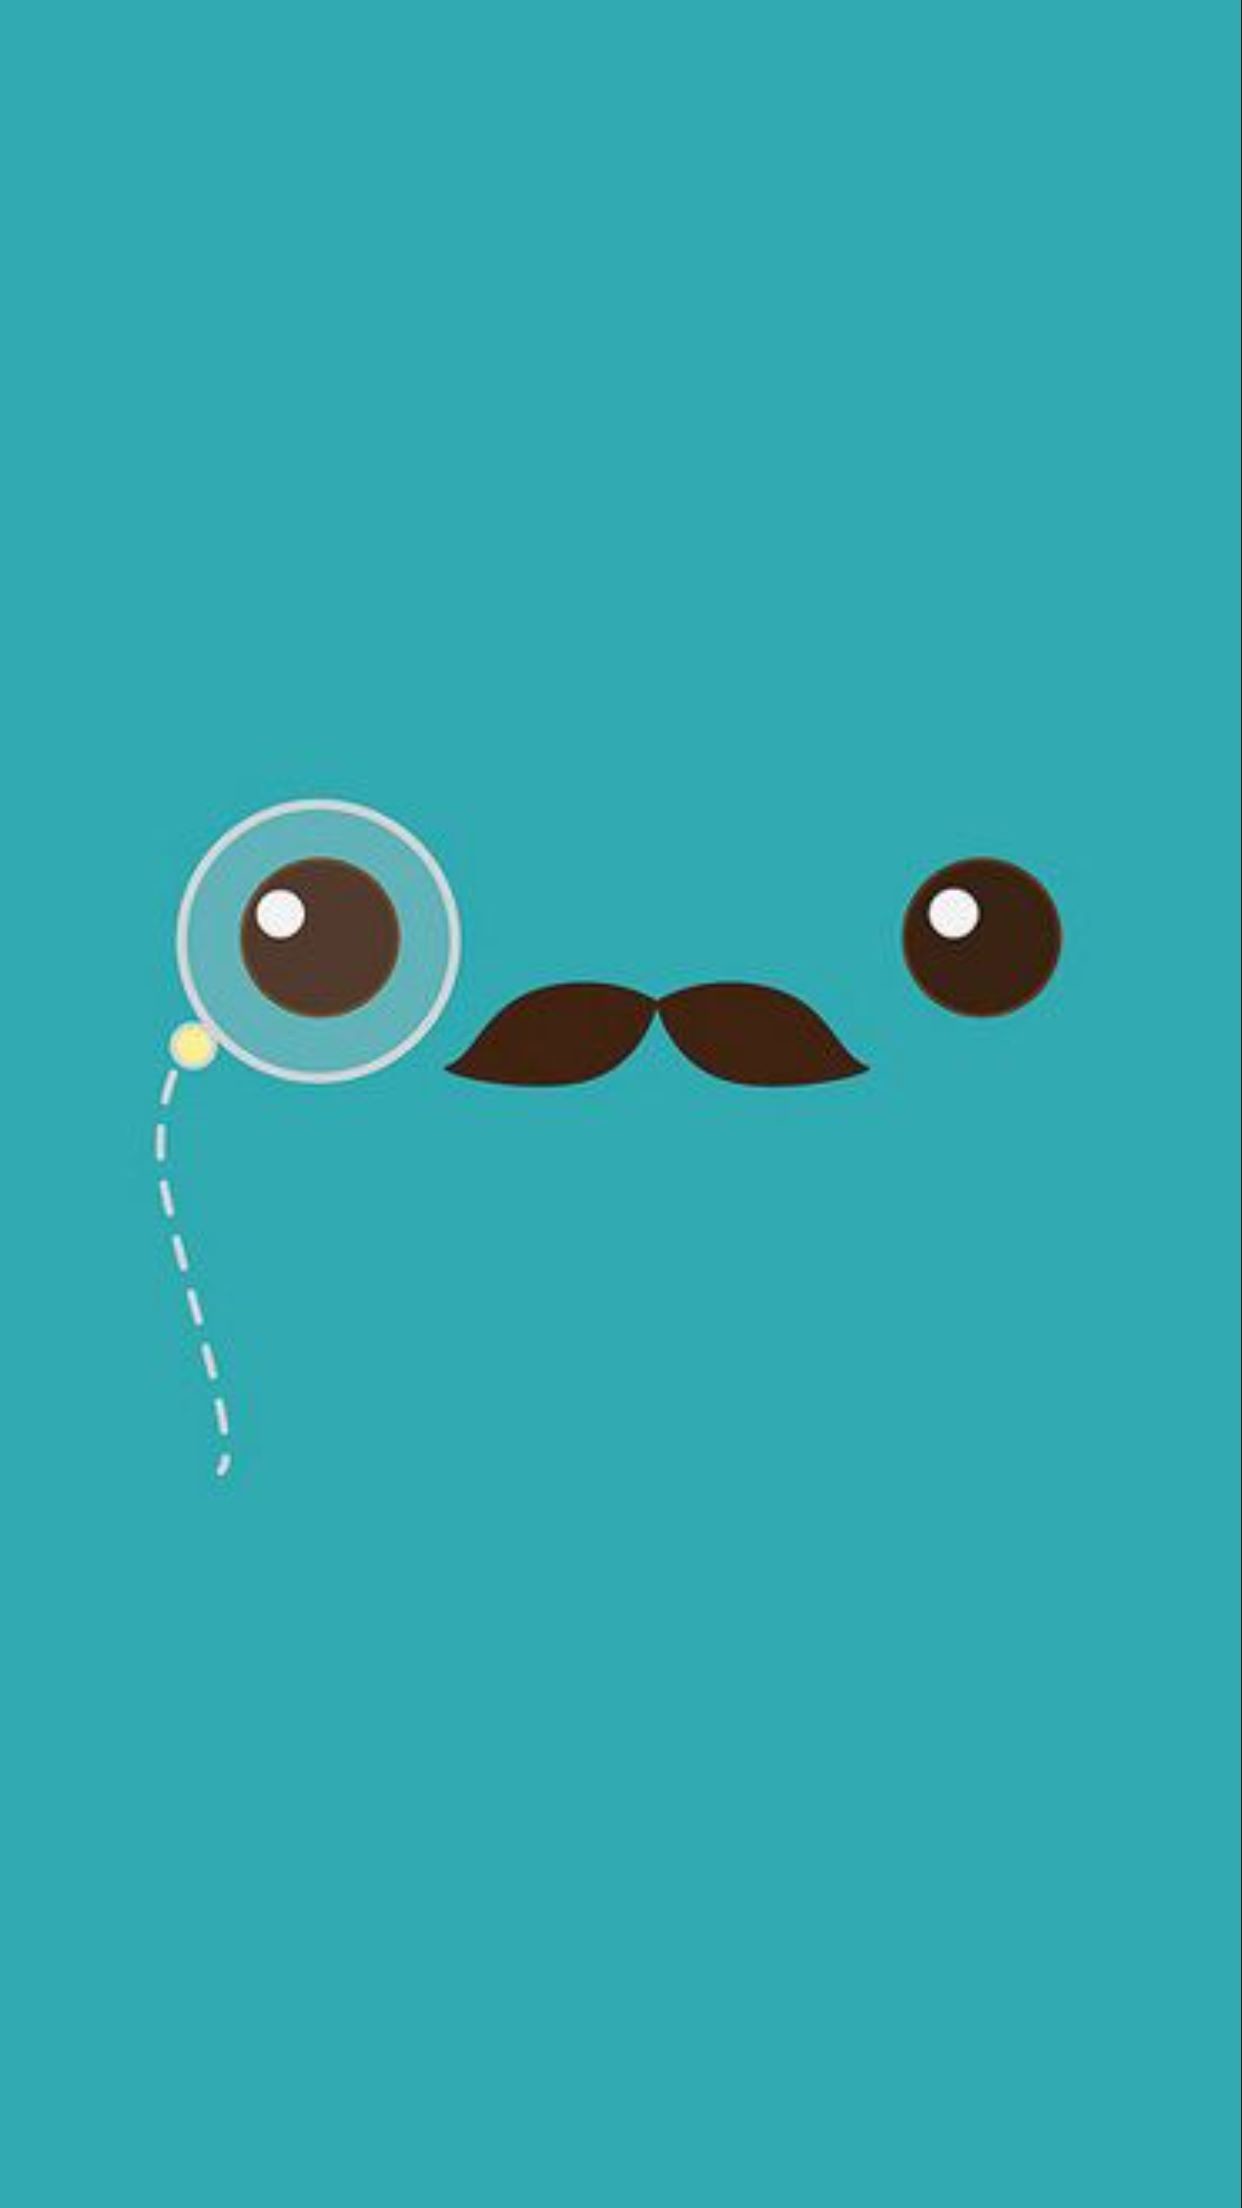 1242x2208 17 Awesome Mustache Wallpapers for Phones and Walls. Cool Iphone ...